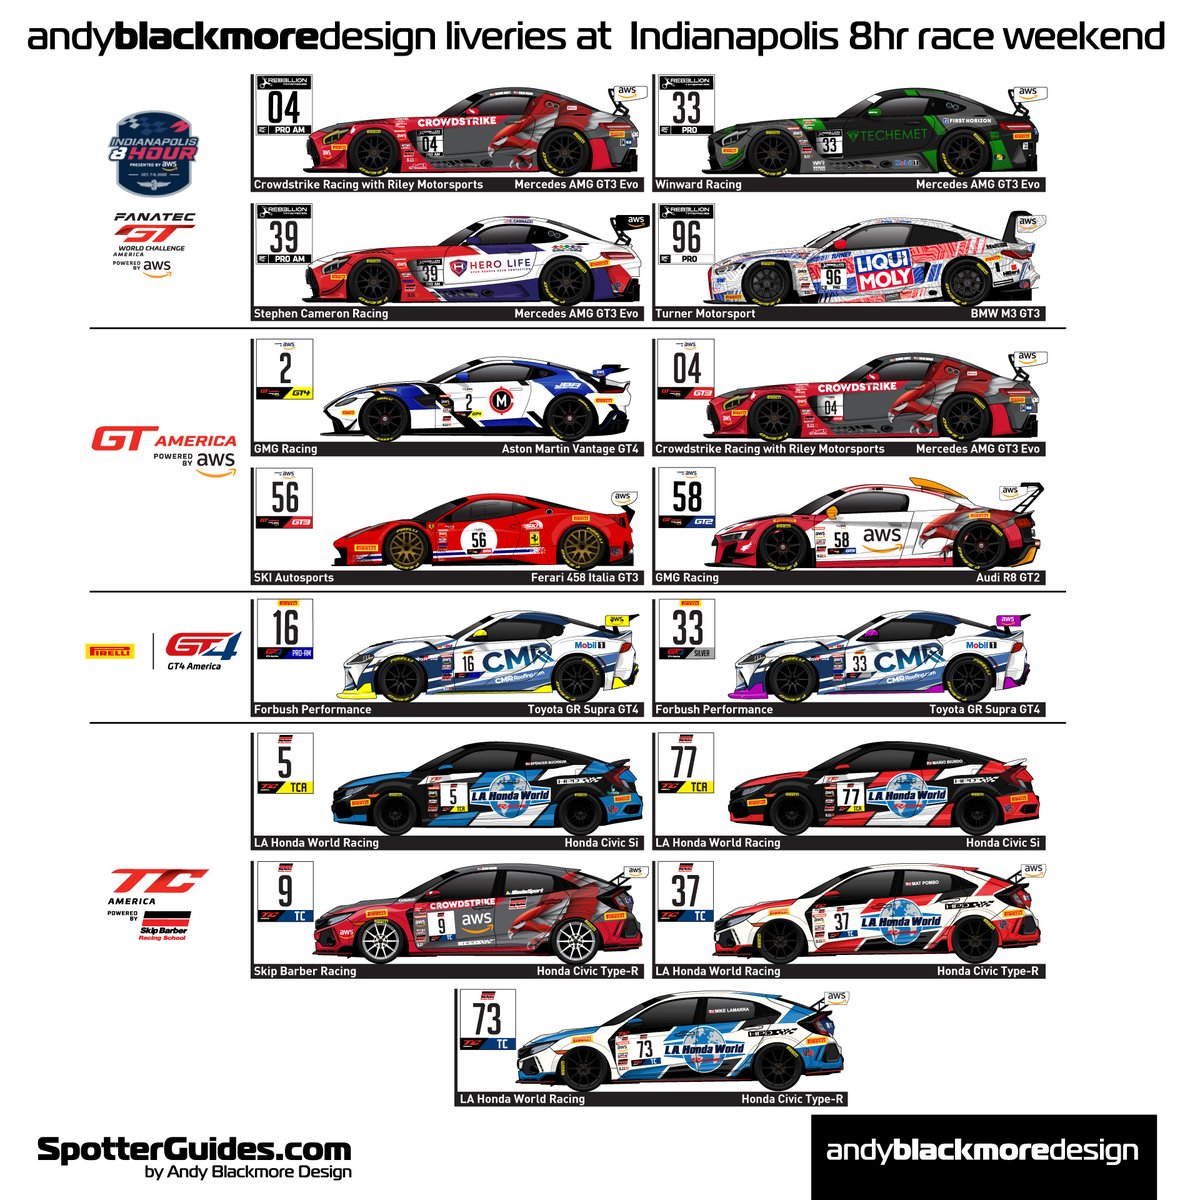 Fortunate to have a number of #liveries during the #SRO #Indy8h race weekend including four entries in the 8hr race, starting at 11.30ET

@CrowdStrikeRcng
@WinwardRacing
@Turnermotrsport #Cagnazzi @GuyCosmo @ForbushTeam @lahondaworld @GMGRacing @mosescj58 #Livery